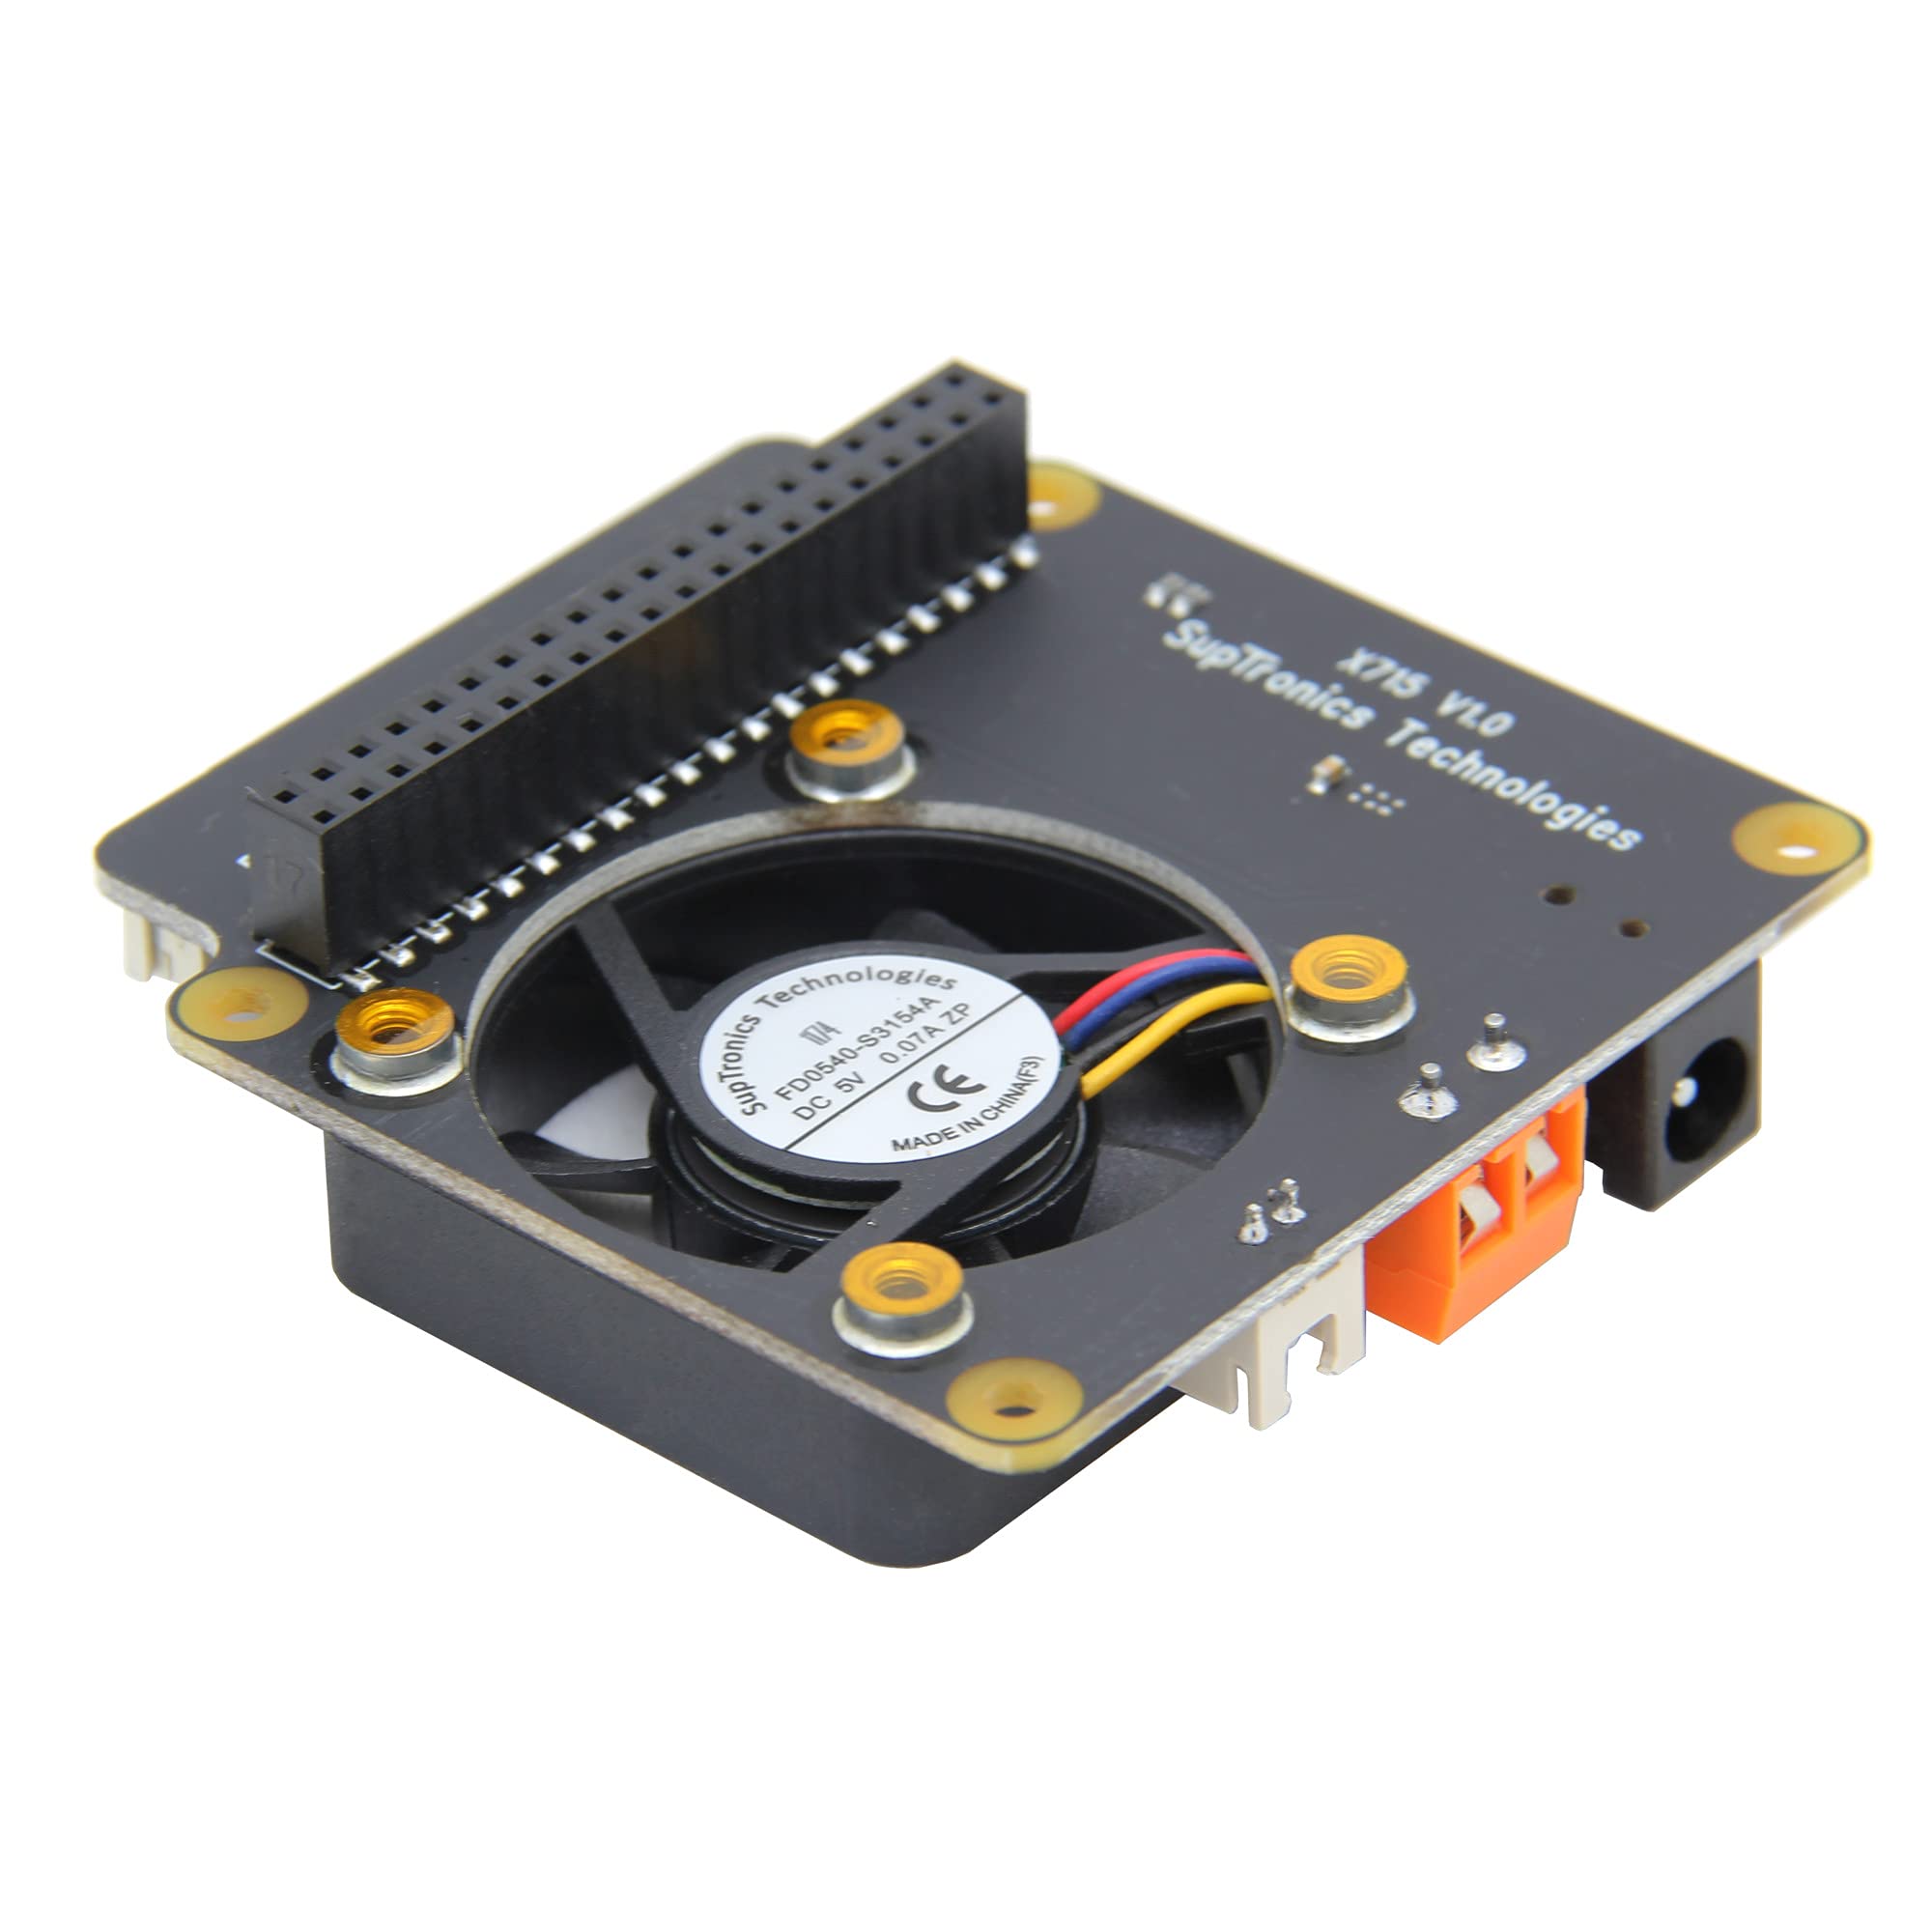 Geekworm for Raspberry Pi 5/4B/3B+/3B X715 V1.0 Power Management & PWM Cooling Board with Wide Voltage Input (6V~60V) Compatible with Raspberry Pi 5/4B/3B+/3B/3A+